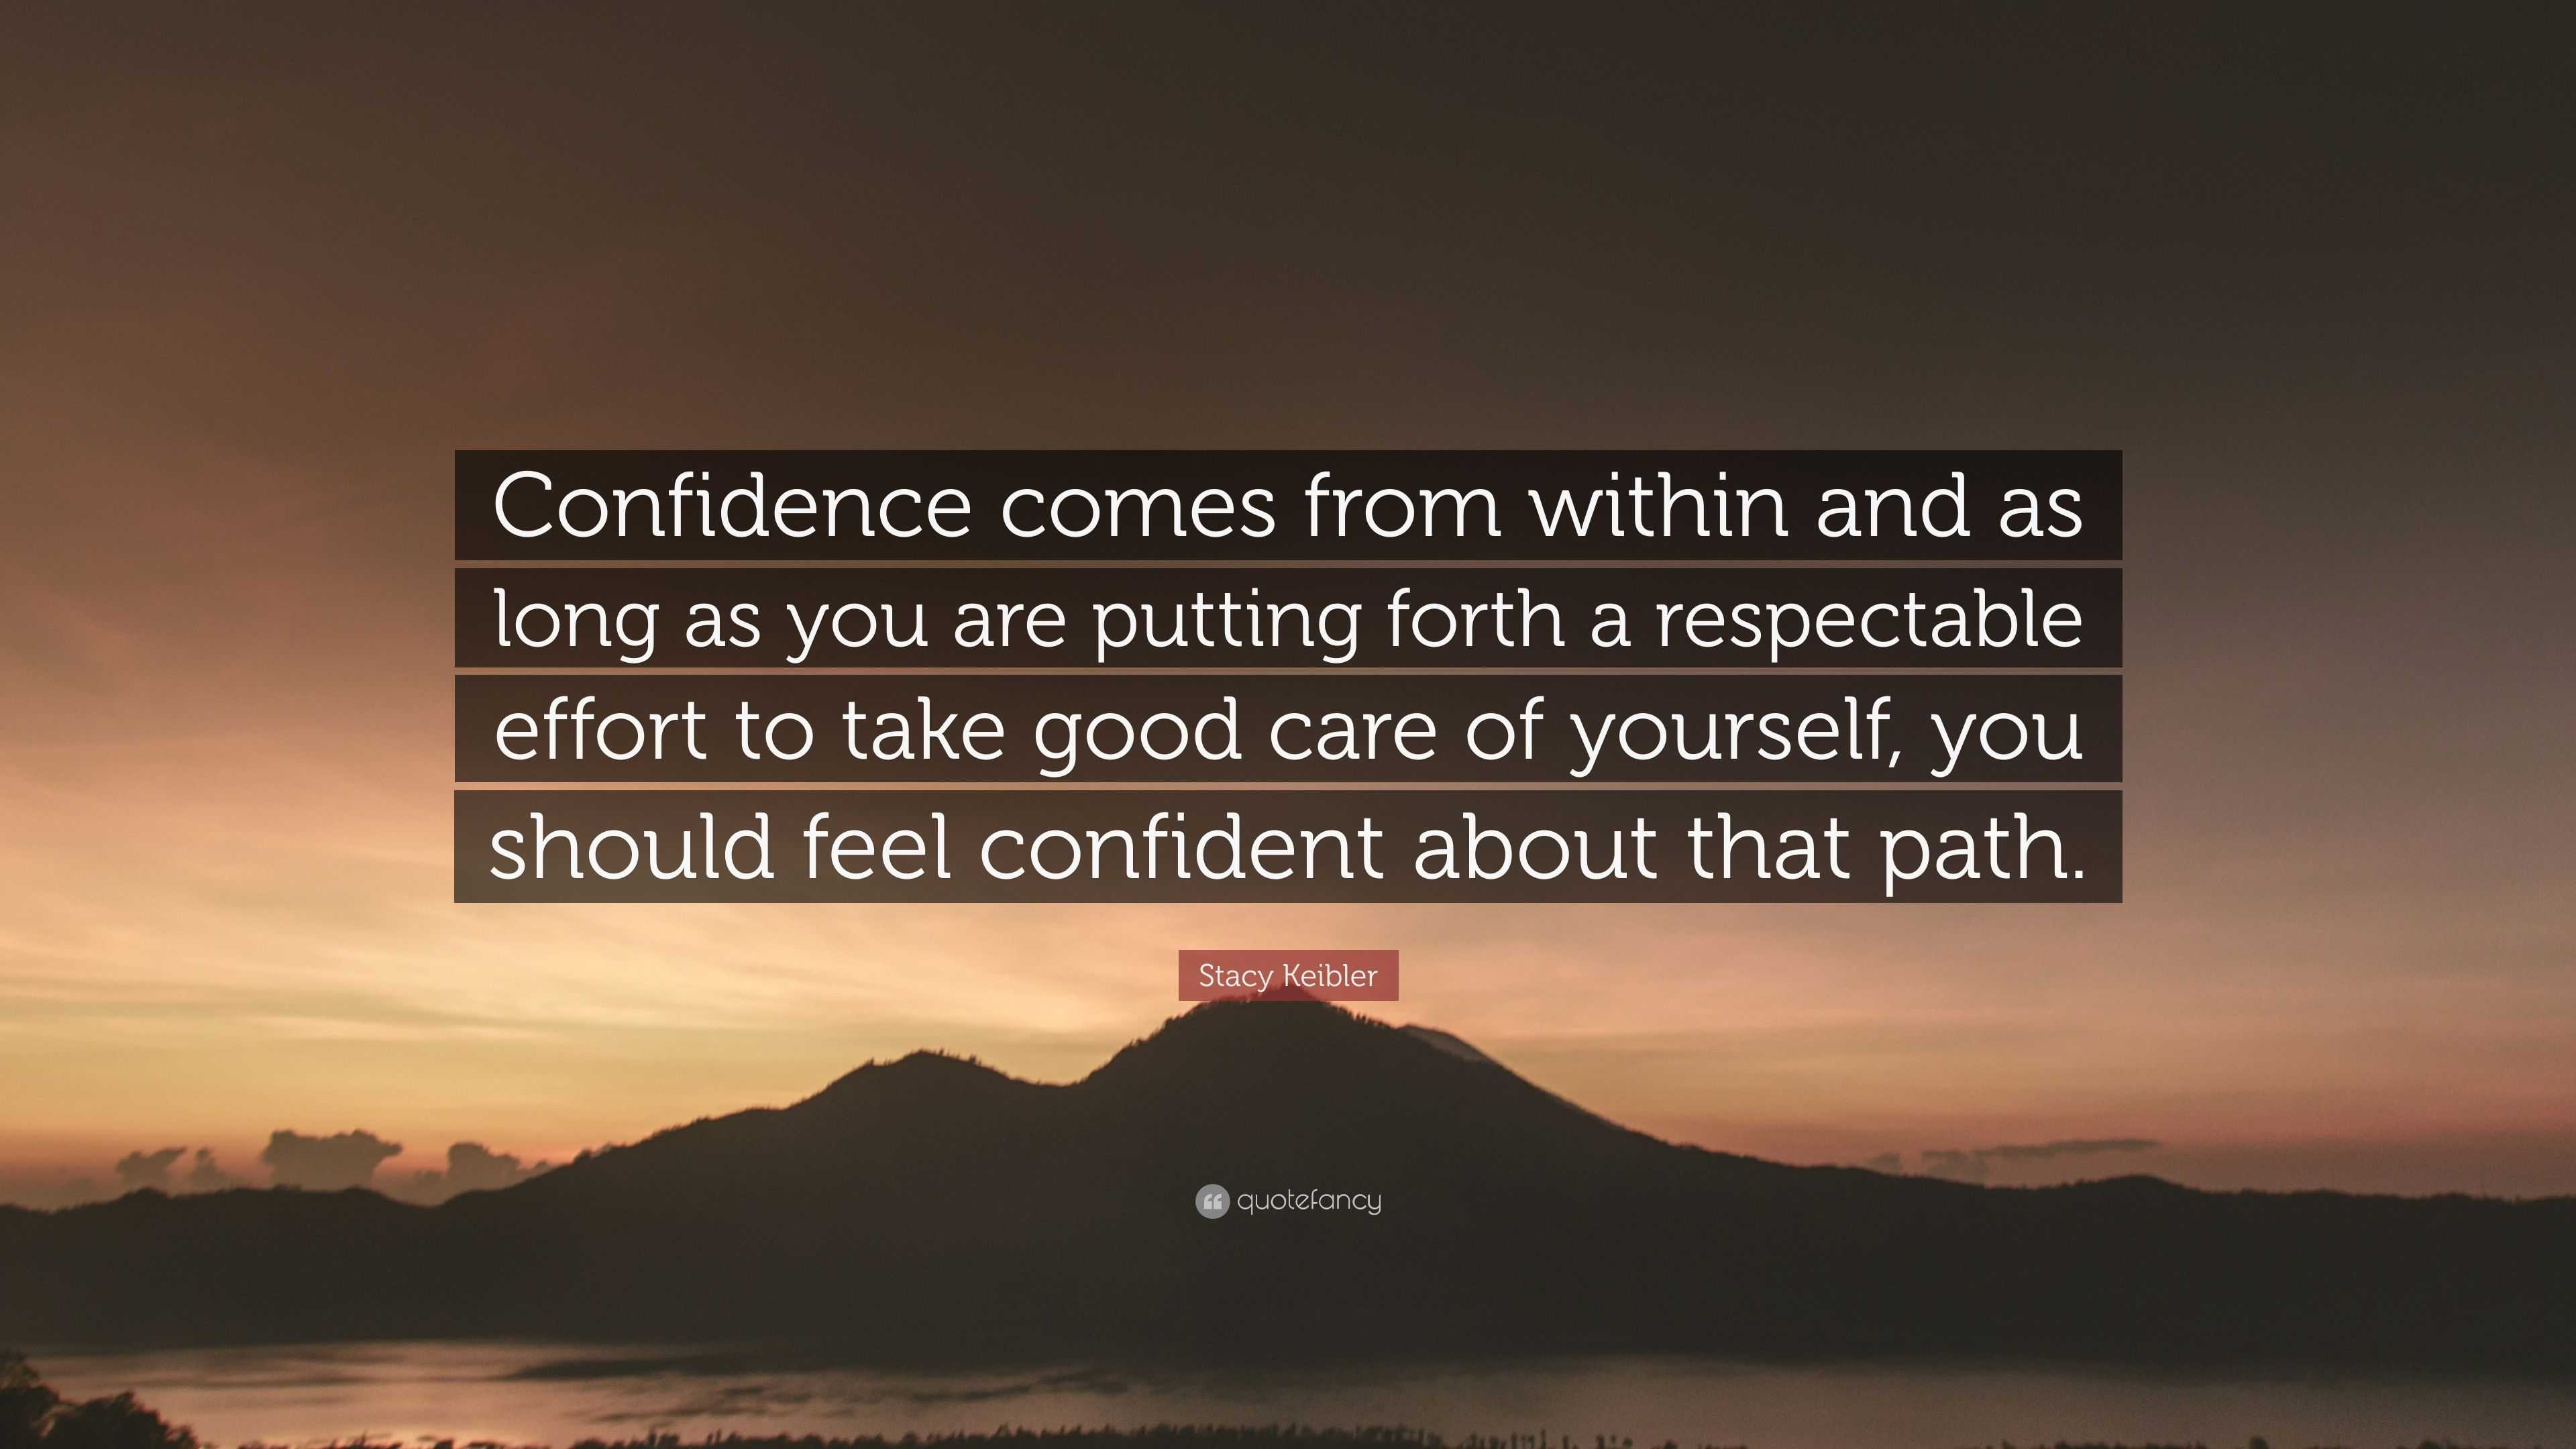 Shapermint - Confidence comes from within youbut having a